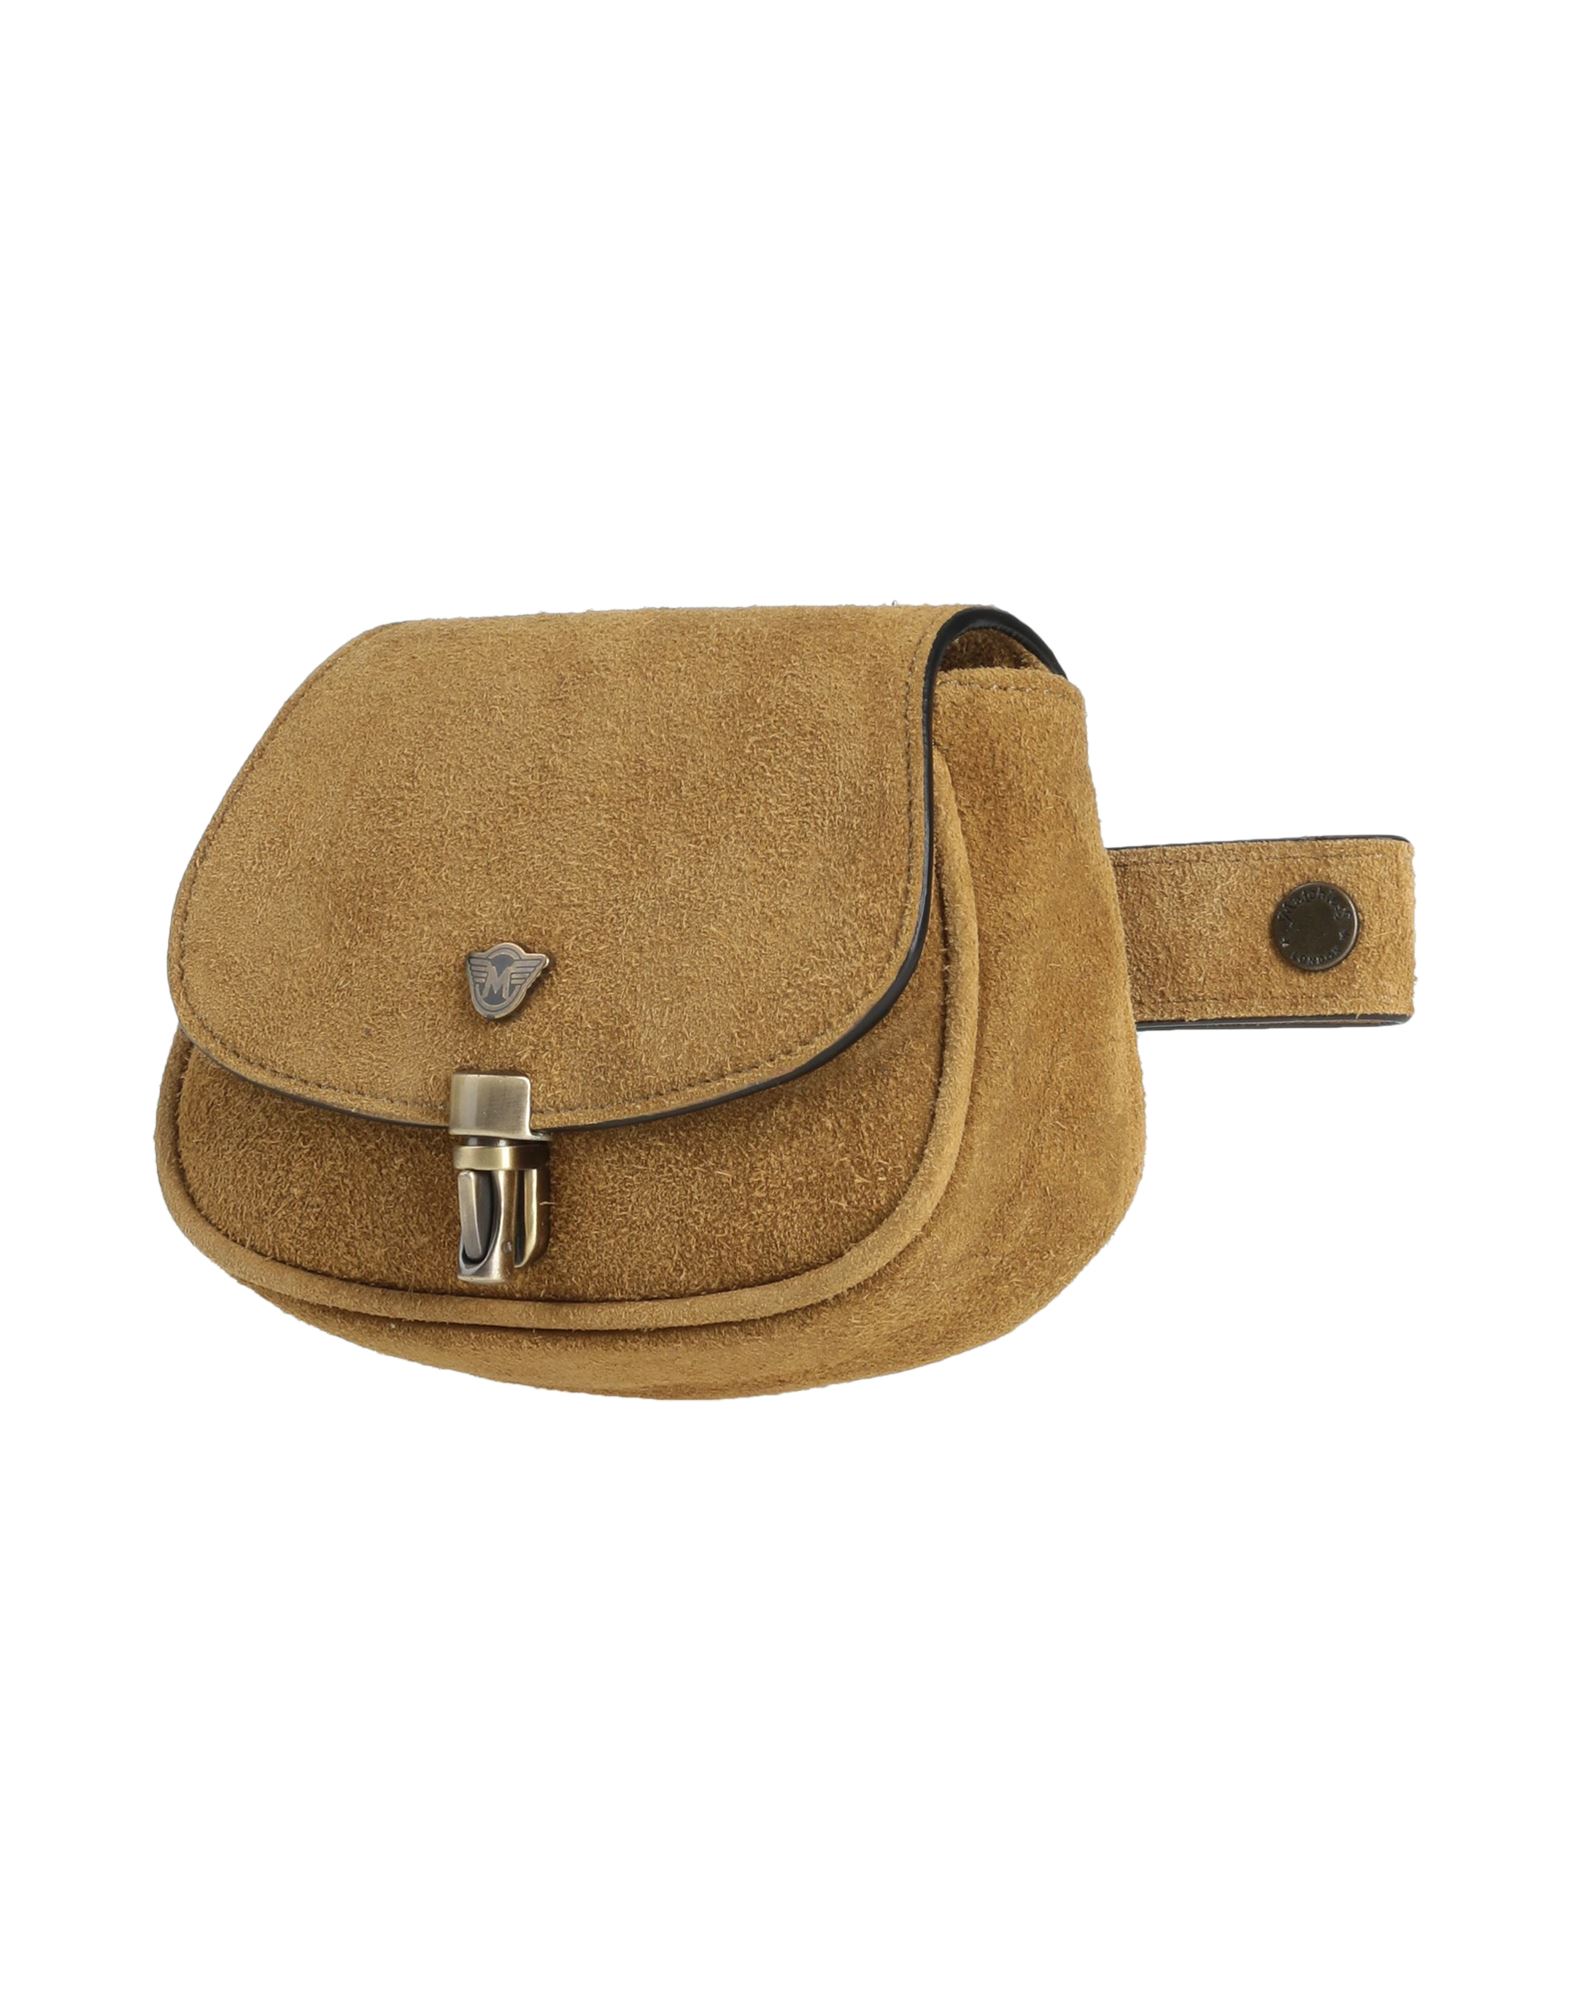 Matchless Bum Bags In Beige